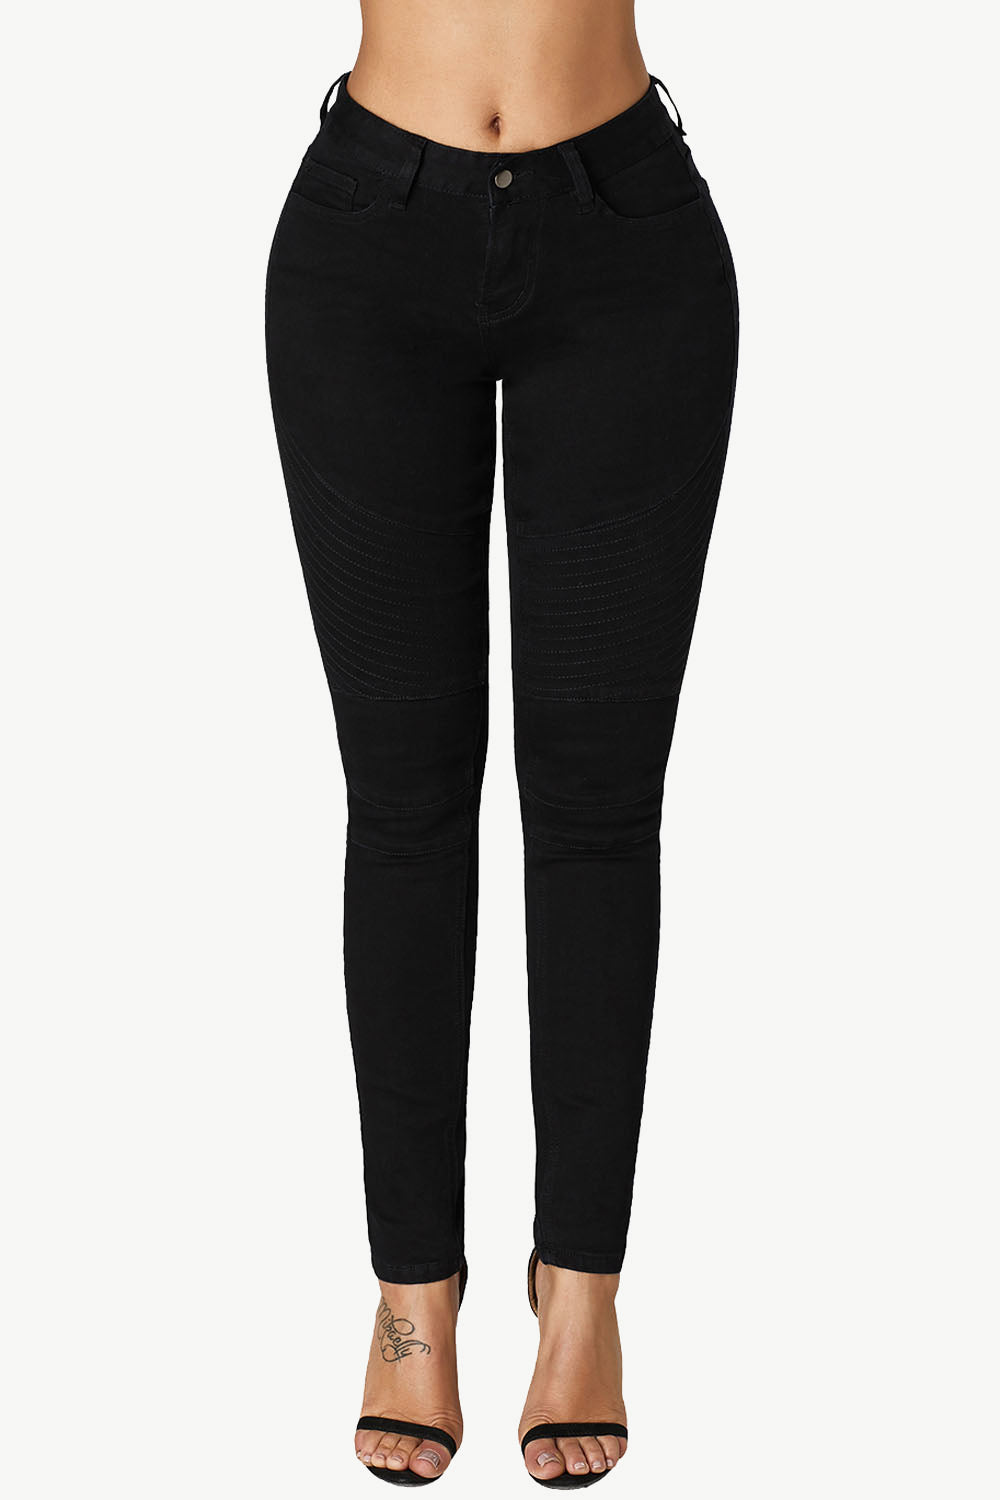 Mid-Rise Waist Skinny Pocketed Jeans - Black / S - Bottoms - Pants - 1 - 2024